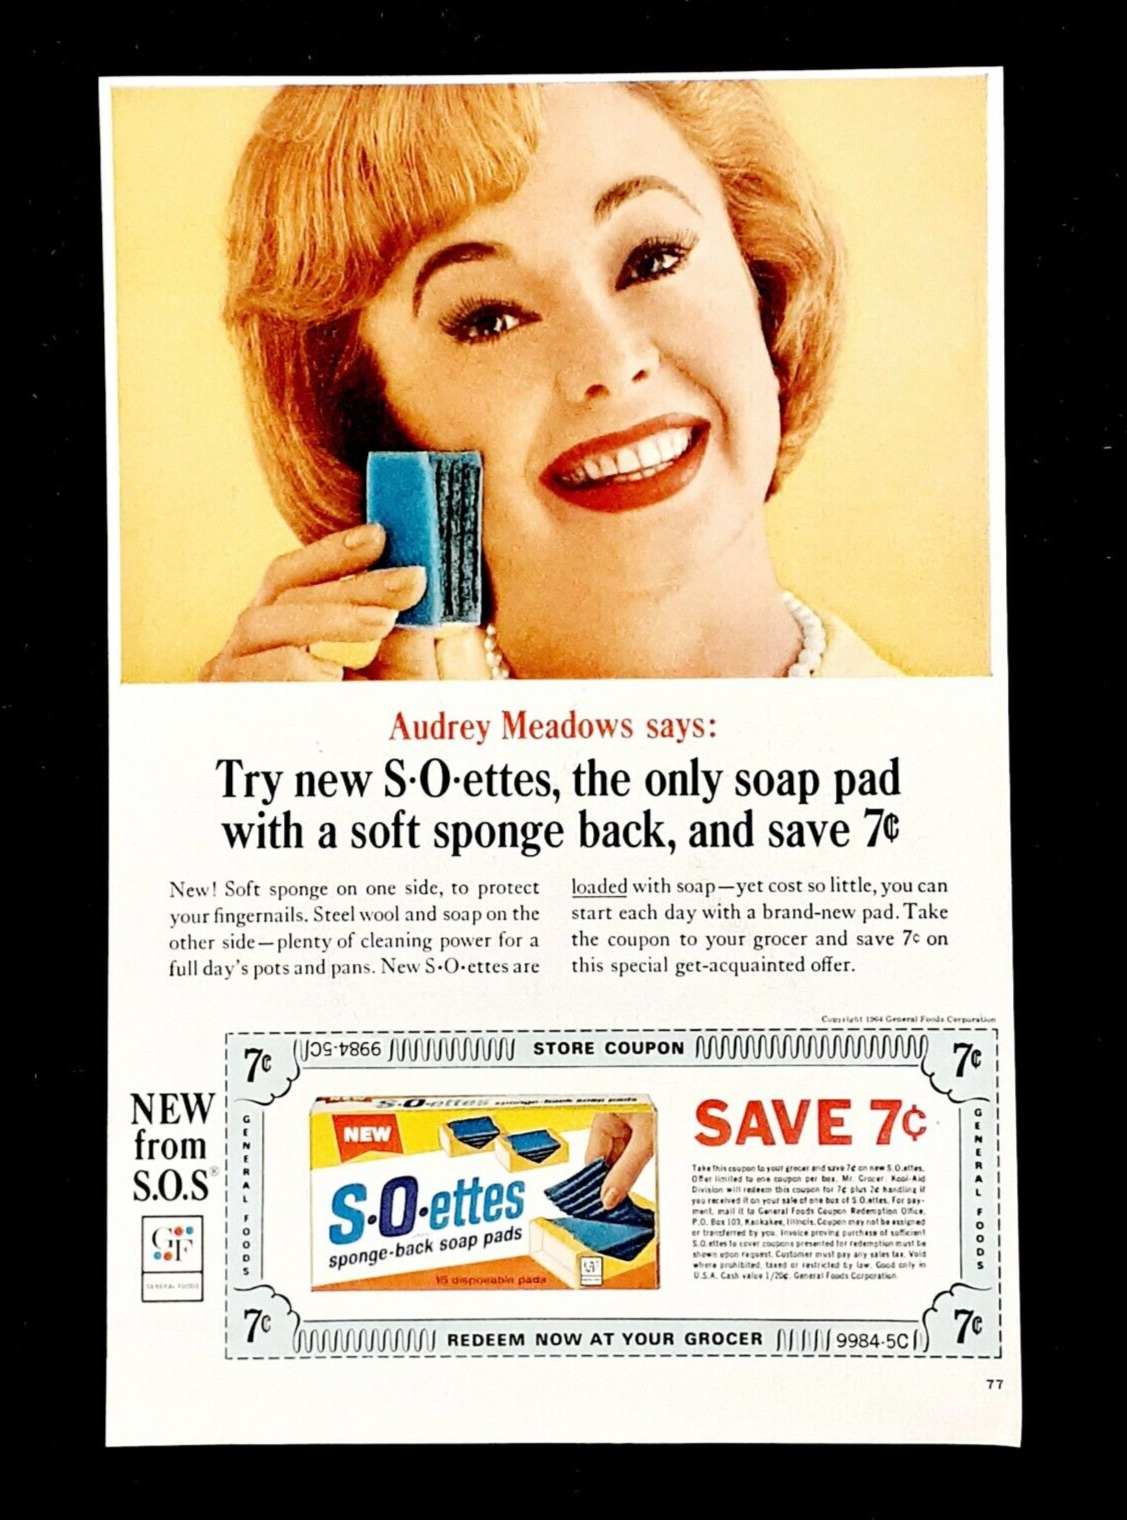 SOS cleaning coupon ad vintage 1964 Actress Audrey Meadows advertisement